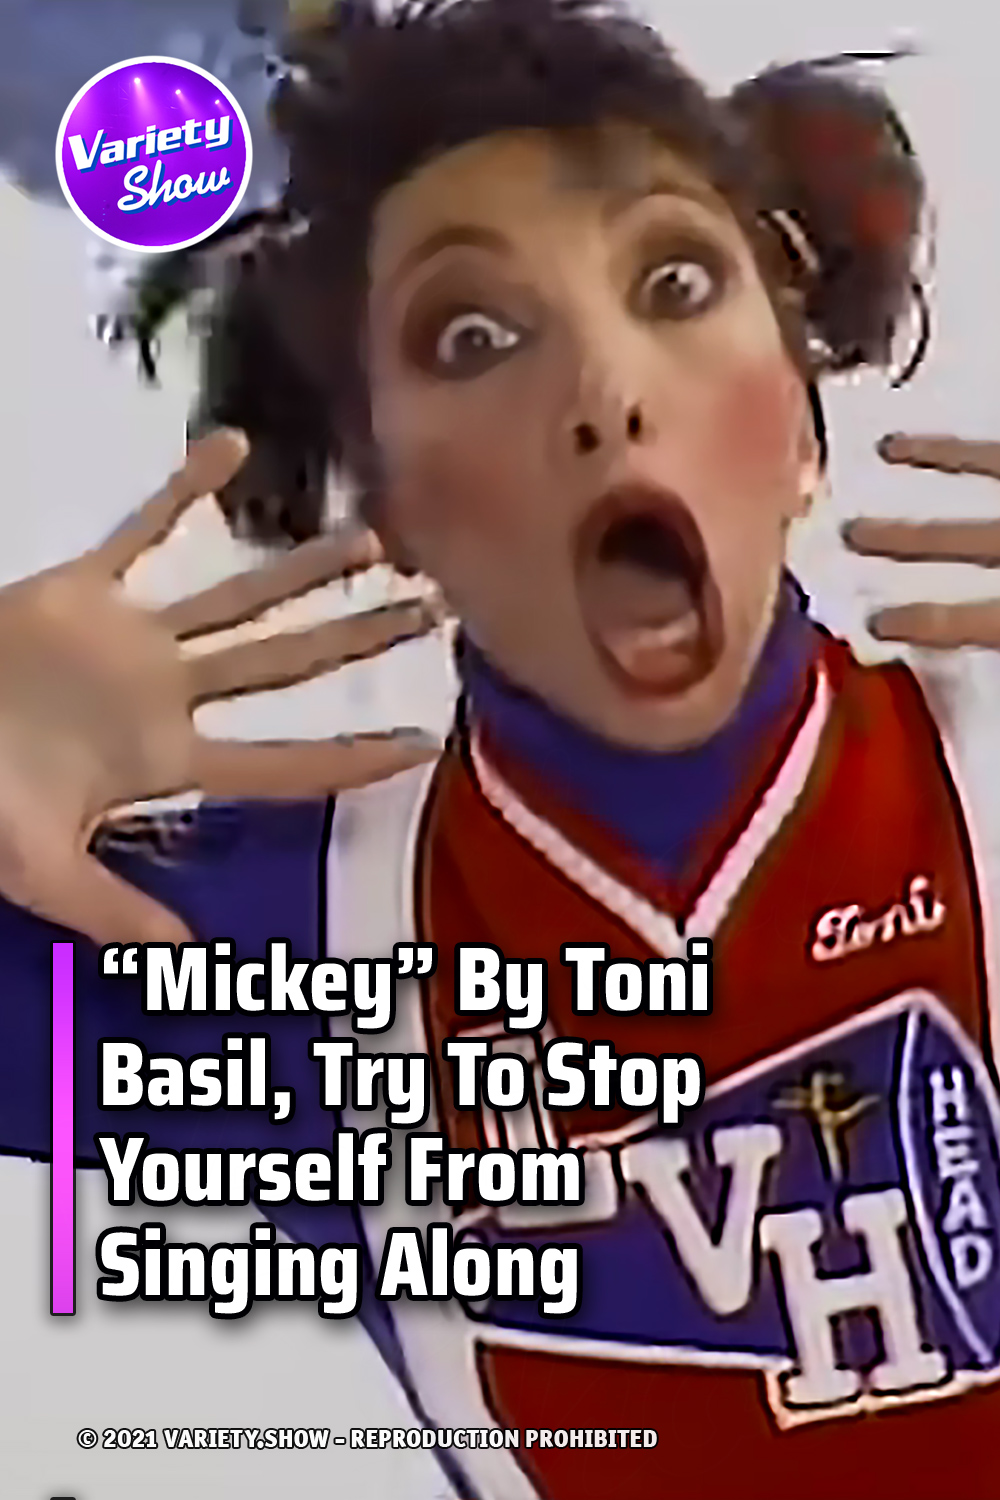 “Mickey” By Toni Basil, Try To Stop Yourself From Singing Along